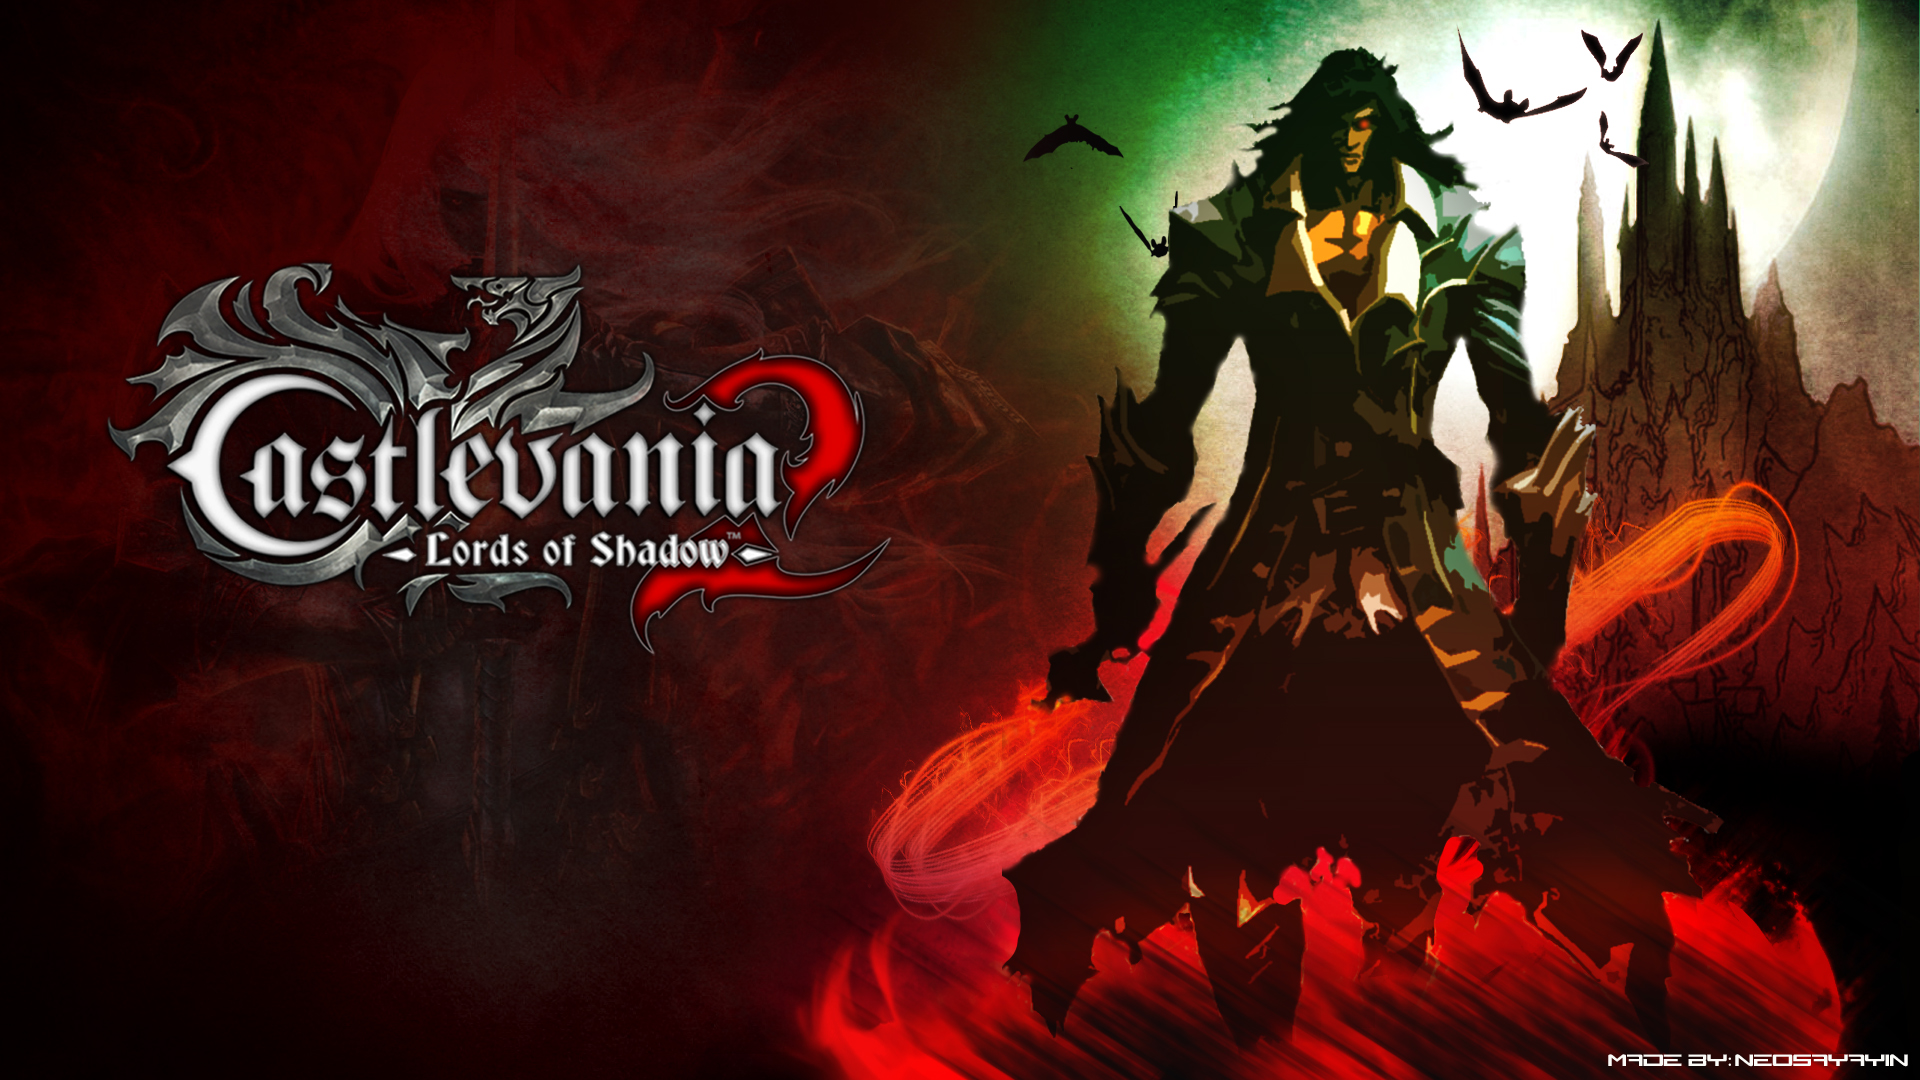 castlevania lords of shadow 2 wallpaper,action adventure game,games,cg artwork,pc game,graphic design